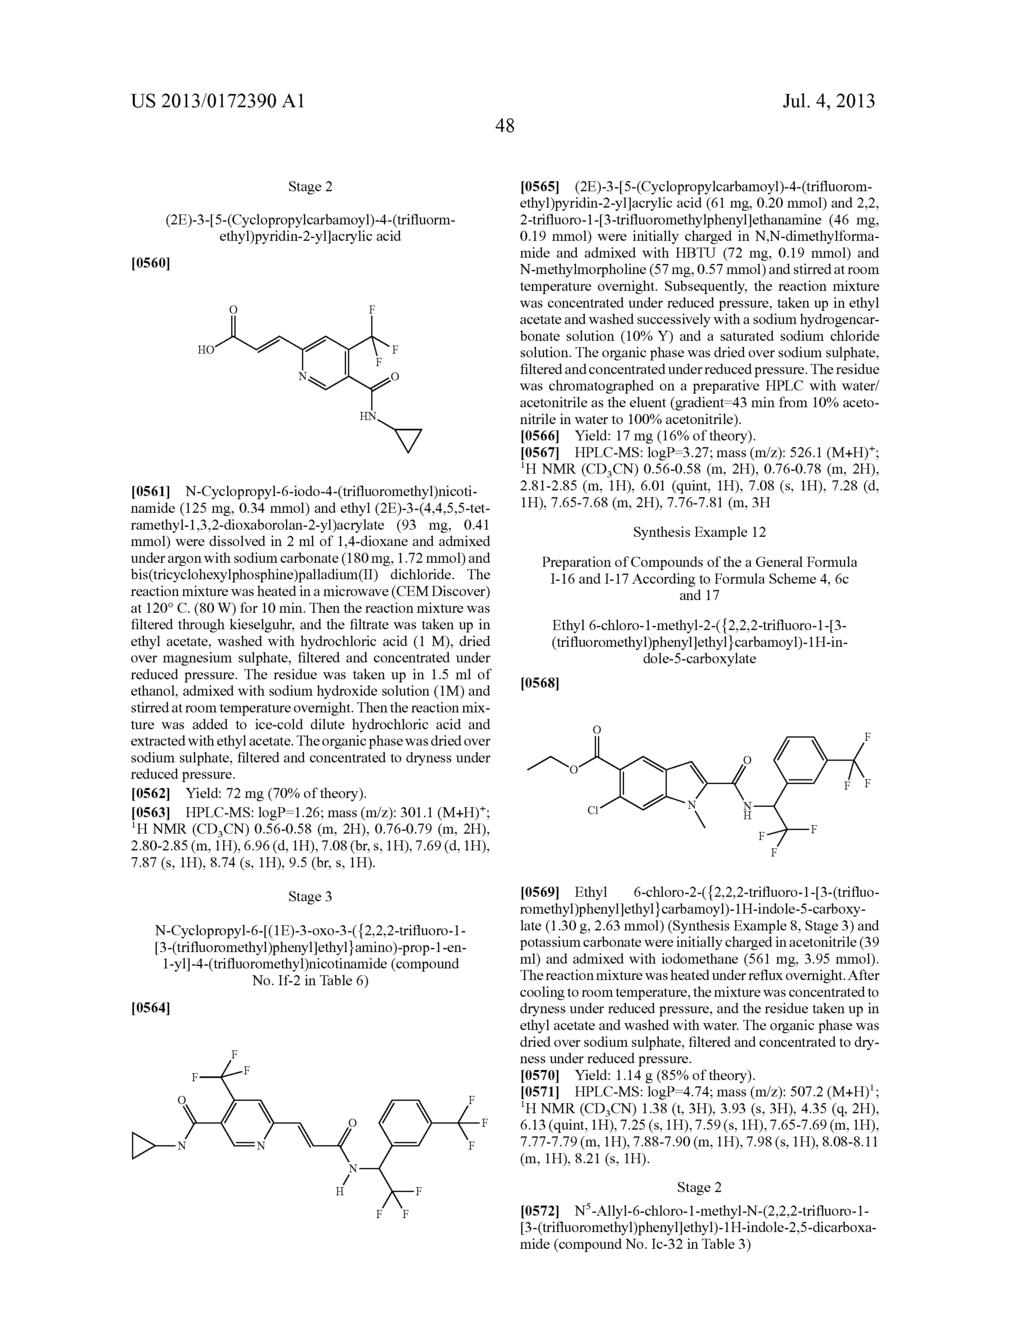 Haloalkyl-Substituted Amides as Insecticides and Acaricides - diagram, schematic, and image 49